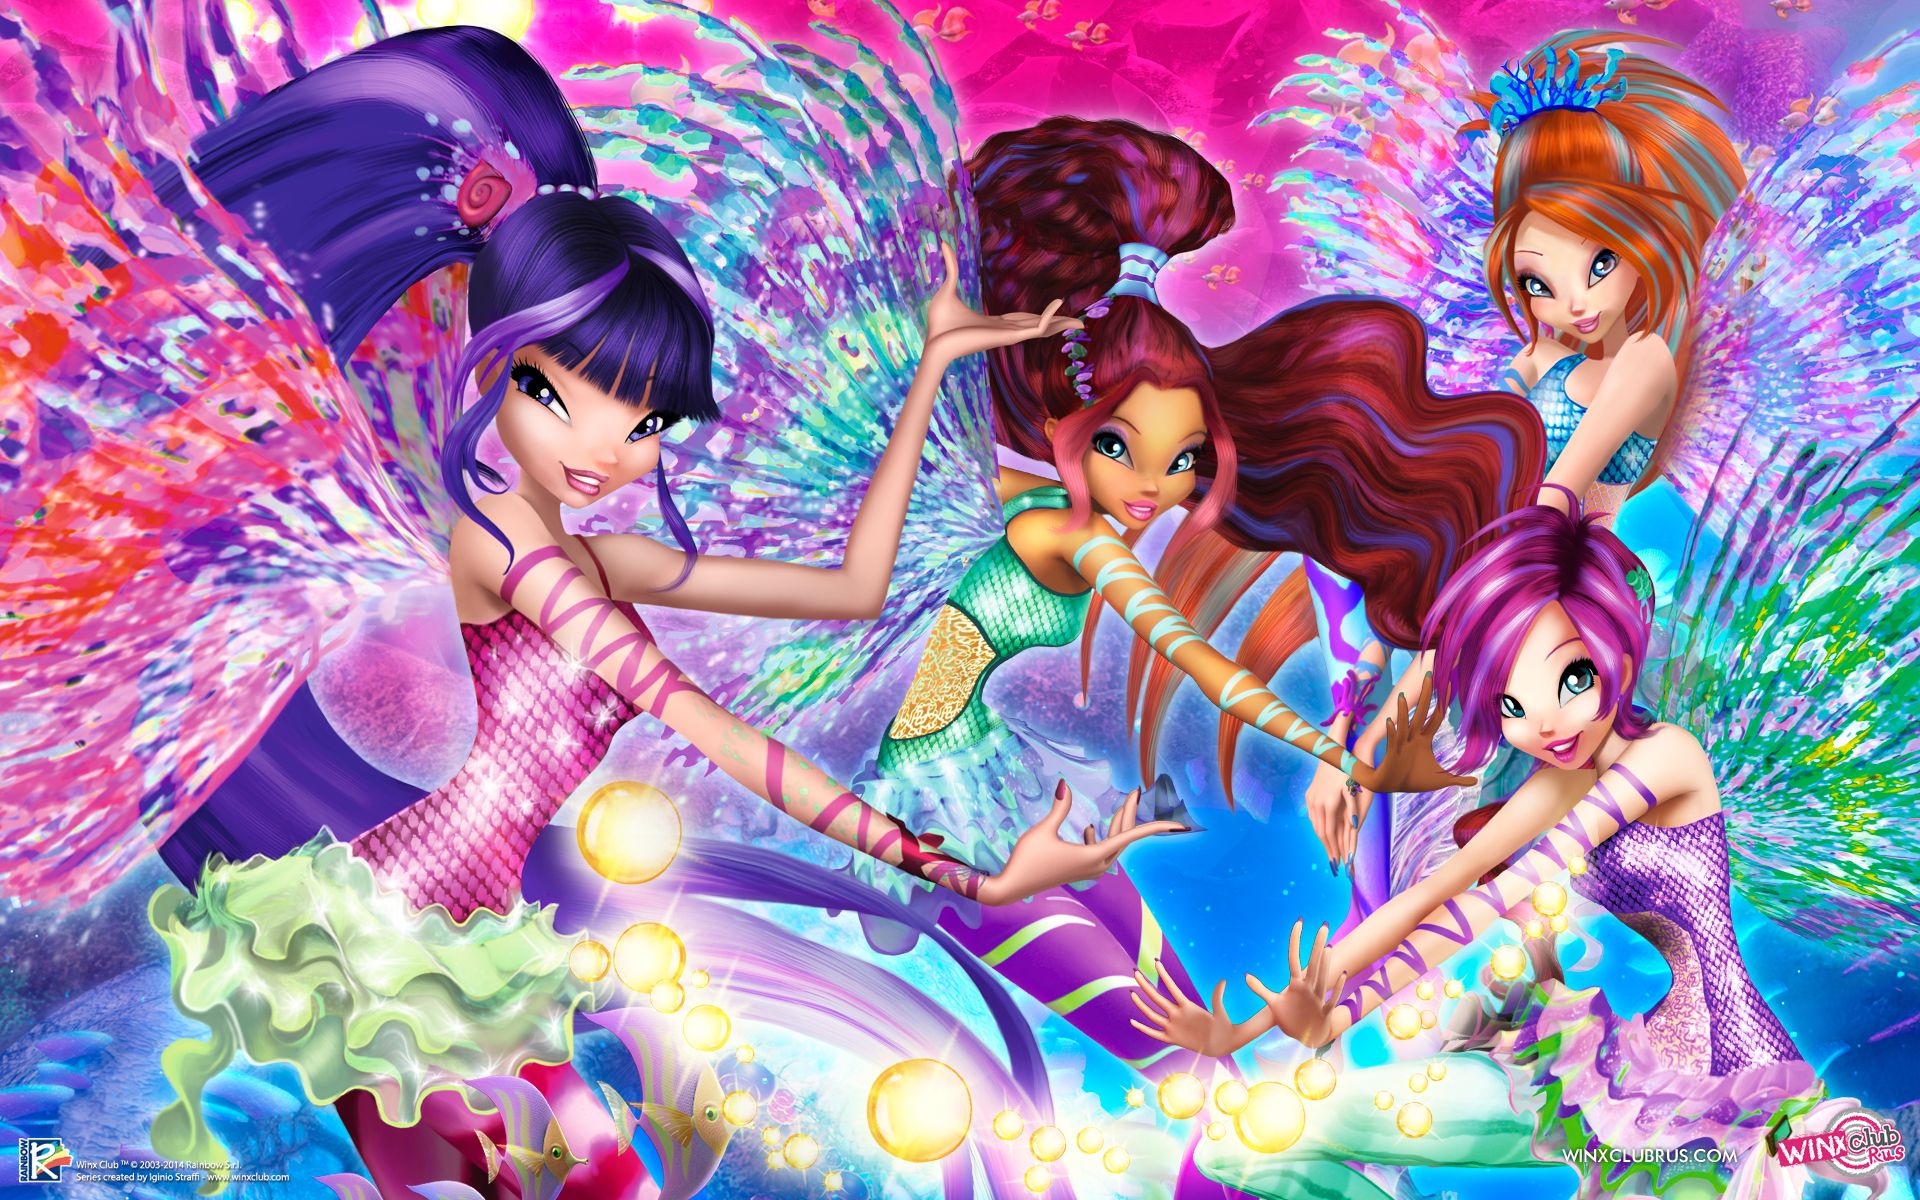 Winx Club new bright and colorful wallpaper with lots of transformations and styles